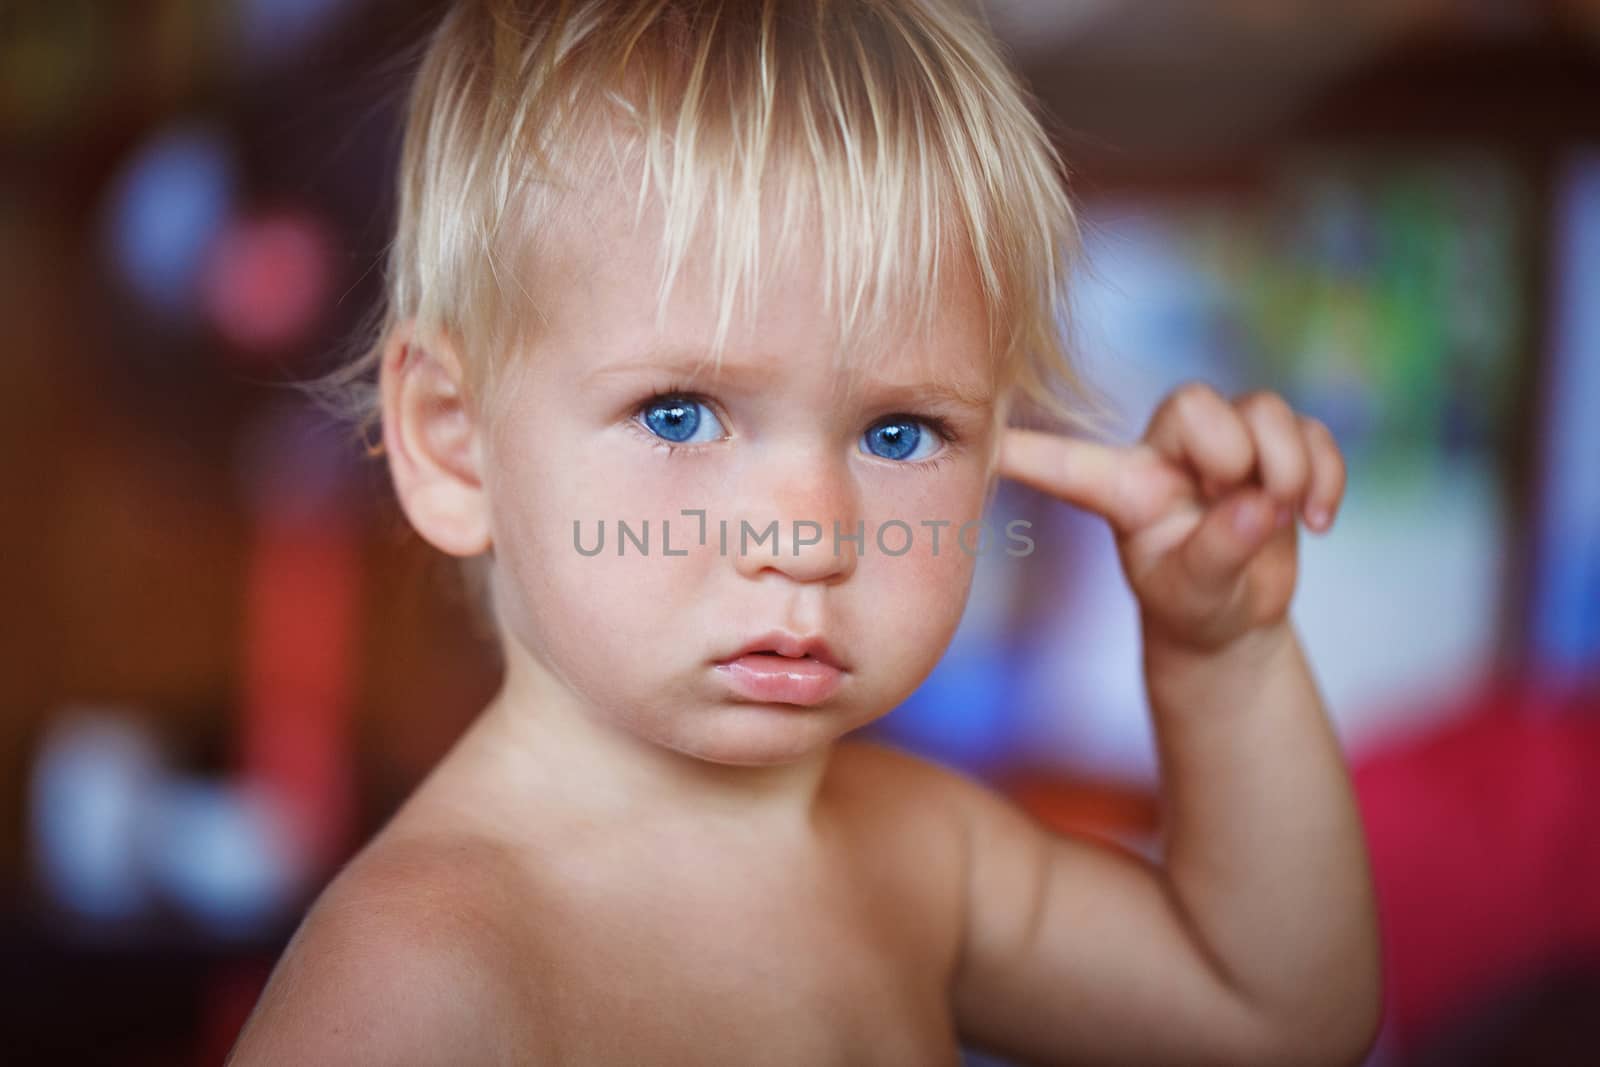 beauty blonde young boy with blue eyes in thailand